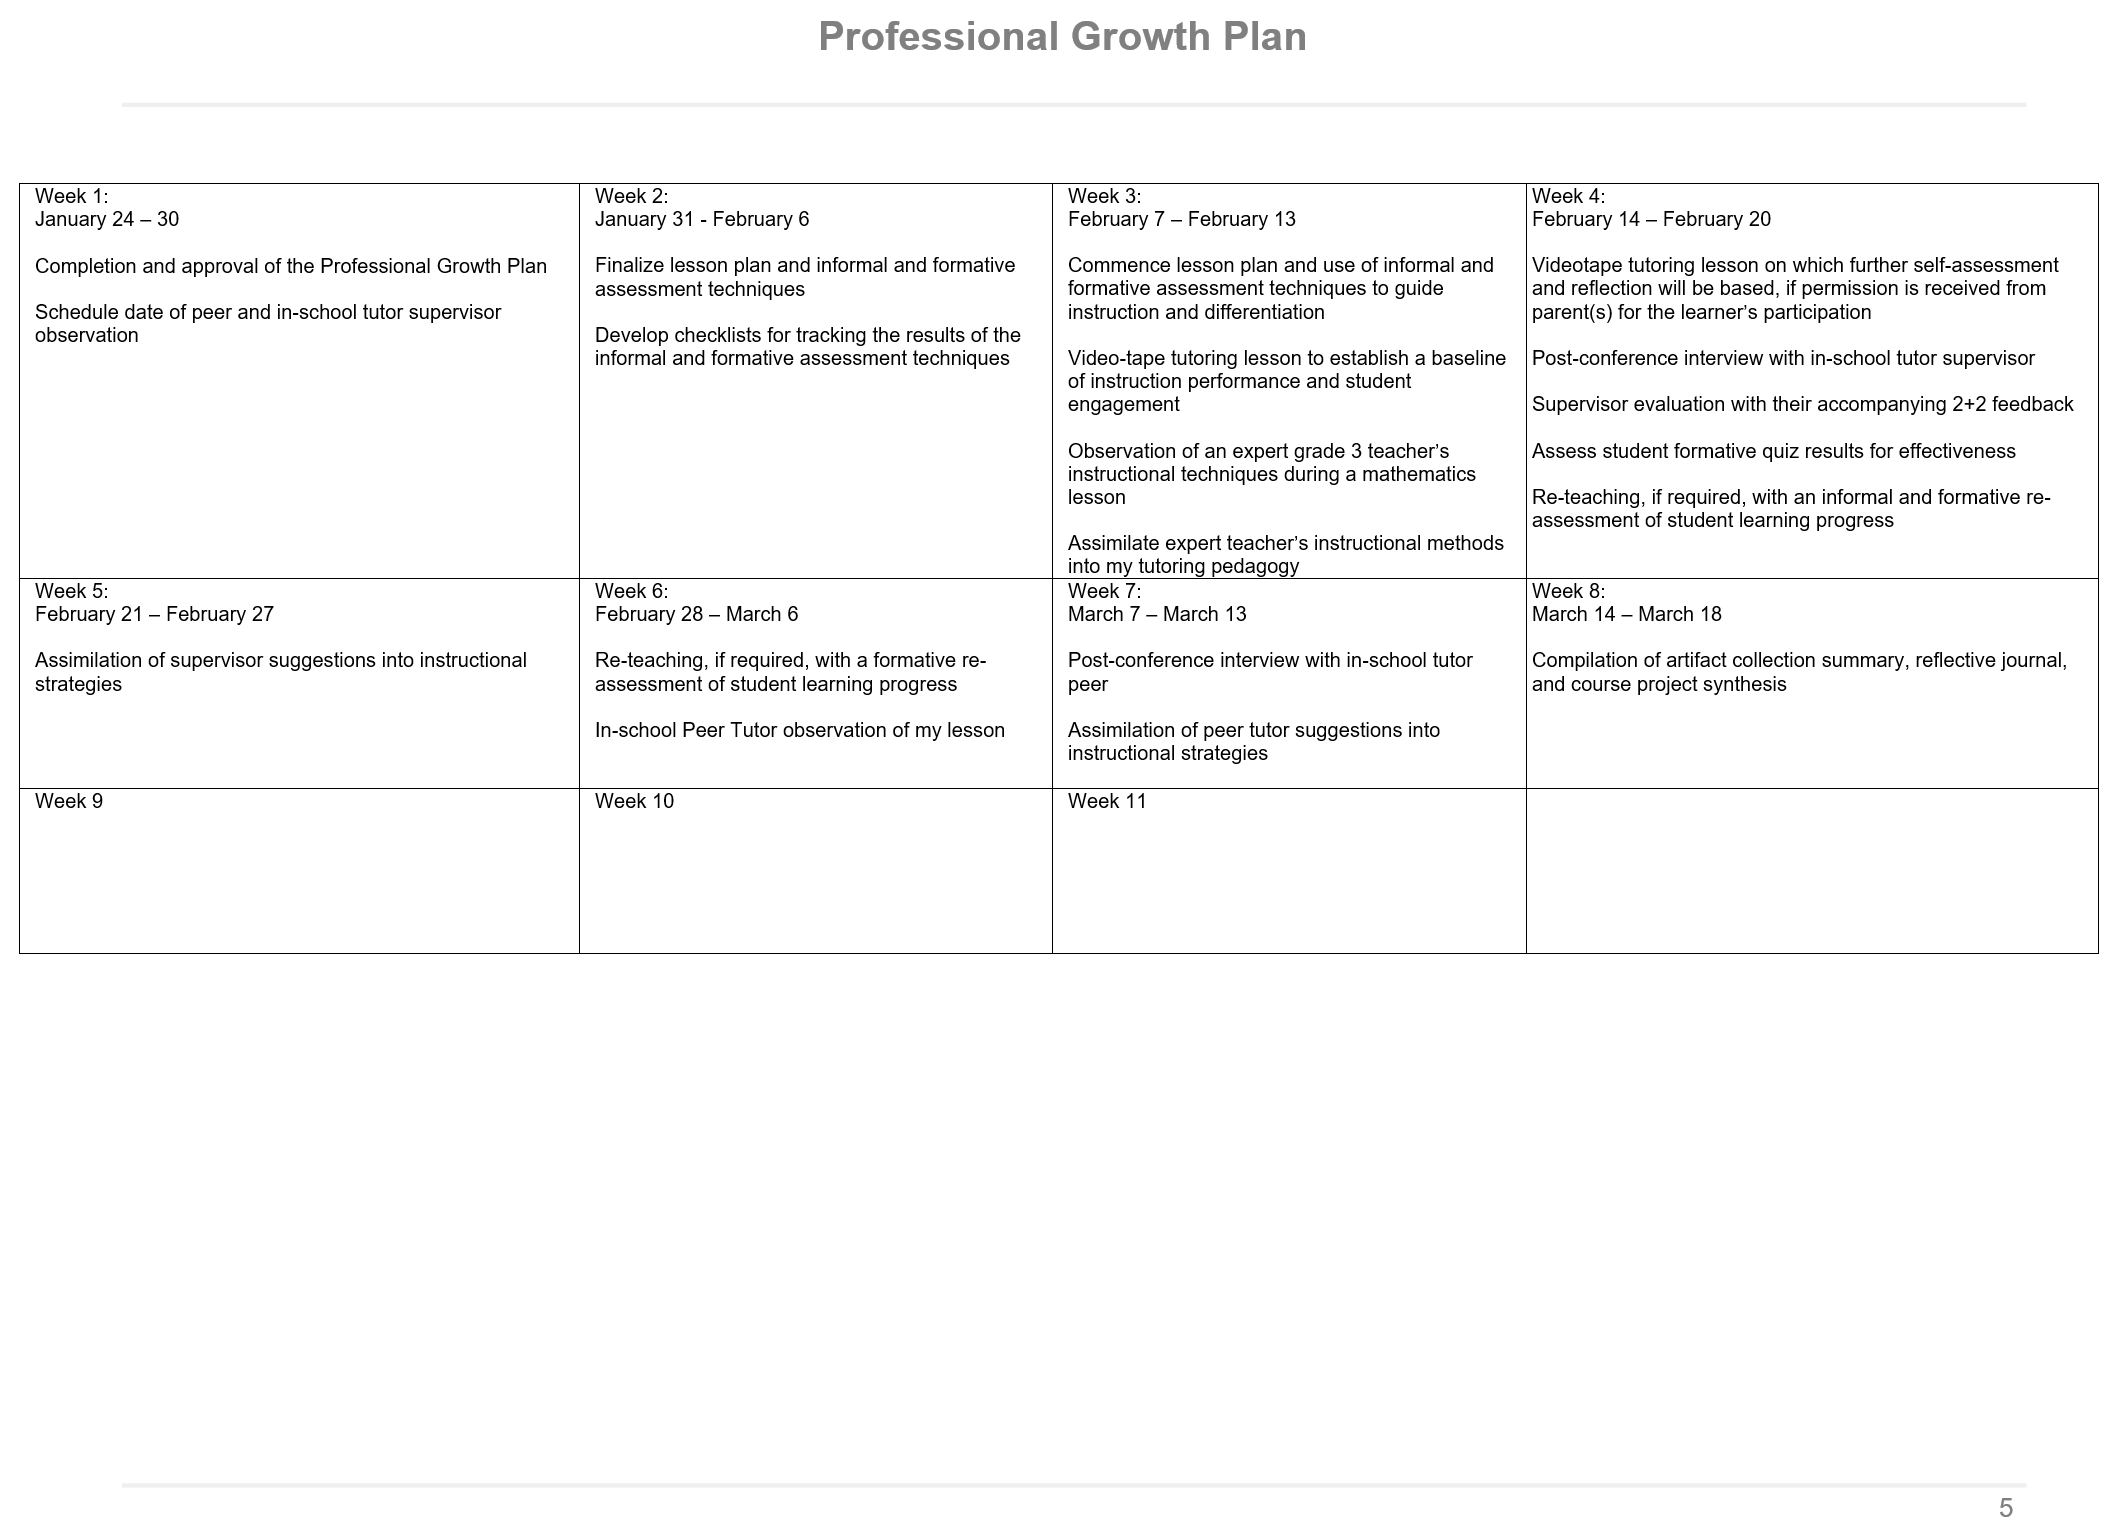 professional growth plan p 5 of 7